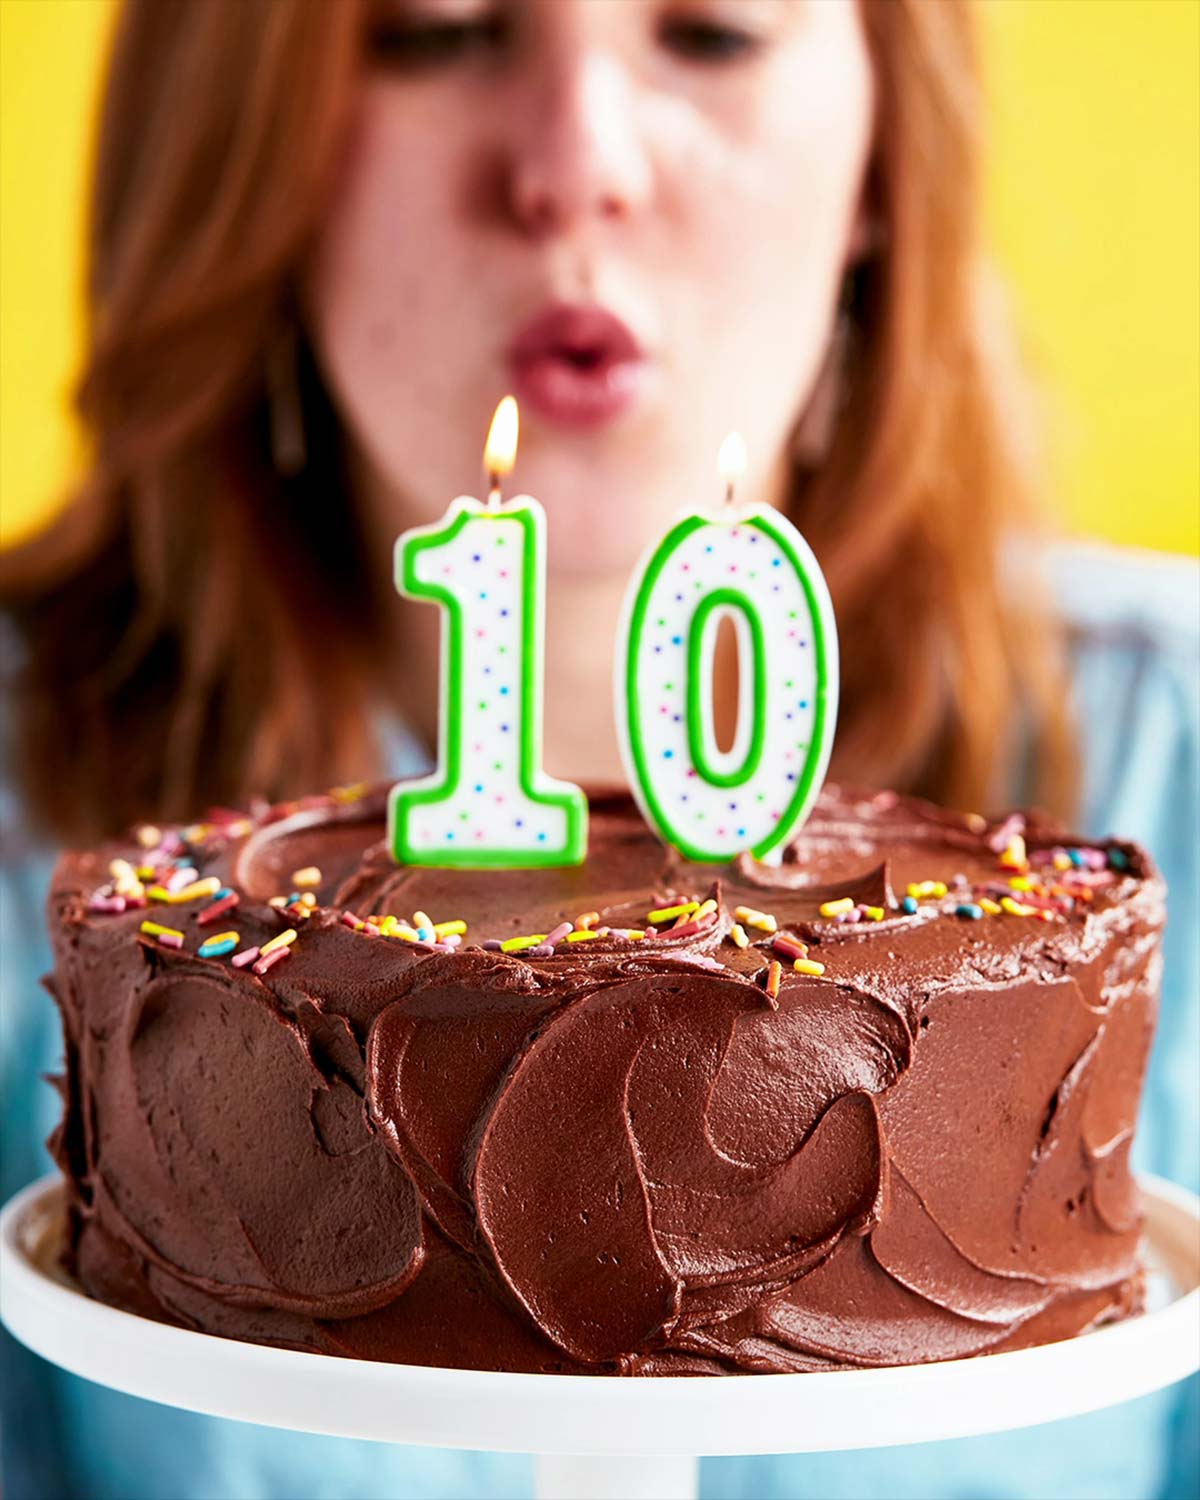 A woman blowing out the candles on a birthday cake with the number 10 on it